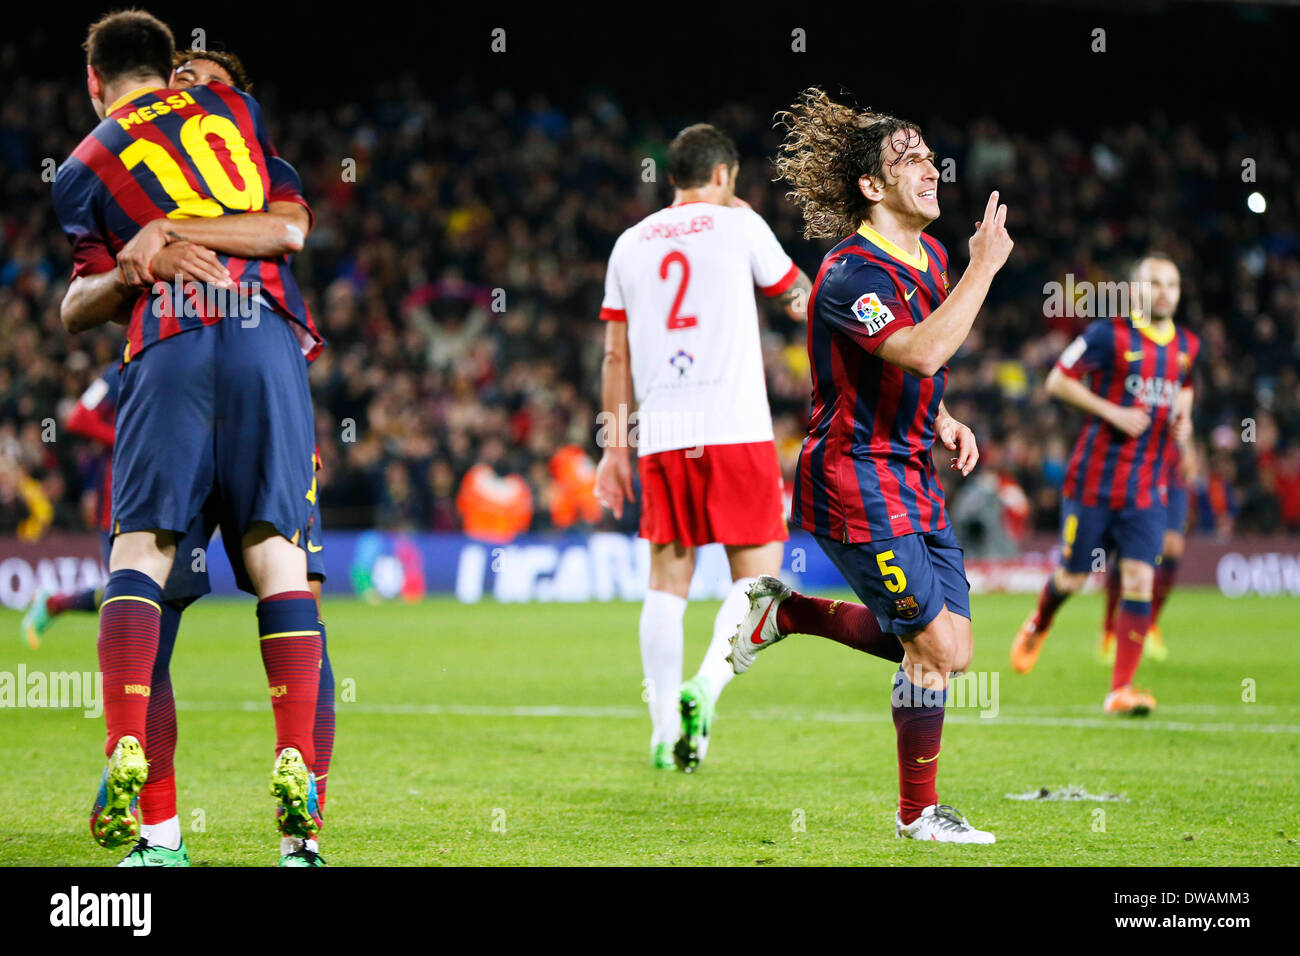 Barcelona, Spain. © D. 2nd Mar, 2014. Carles Puyol (Barcelona) Football / Soccer : Carles Puyol of Barcelona celebrates after scoring their 3rd goal during the Spanish Primera Division 'Liga BBVA' match between FC Barcelona 4-1 Almeria at Camp Nou in Barcelona, Spain. © D .Nakashima/AFLO/Alamy Live News Stock Photo